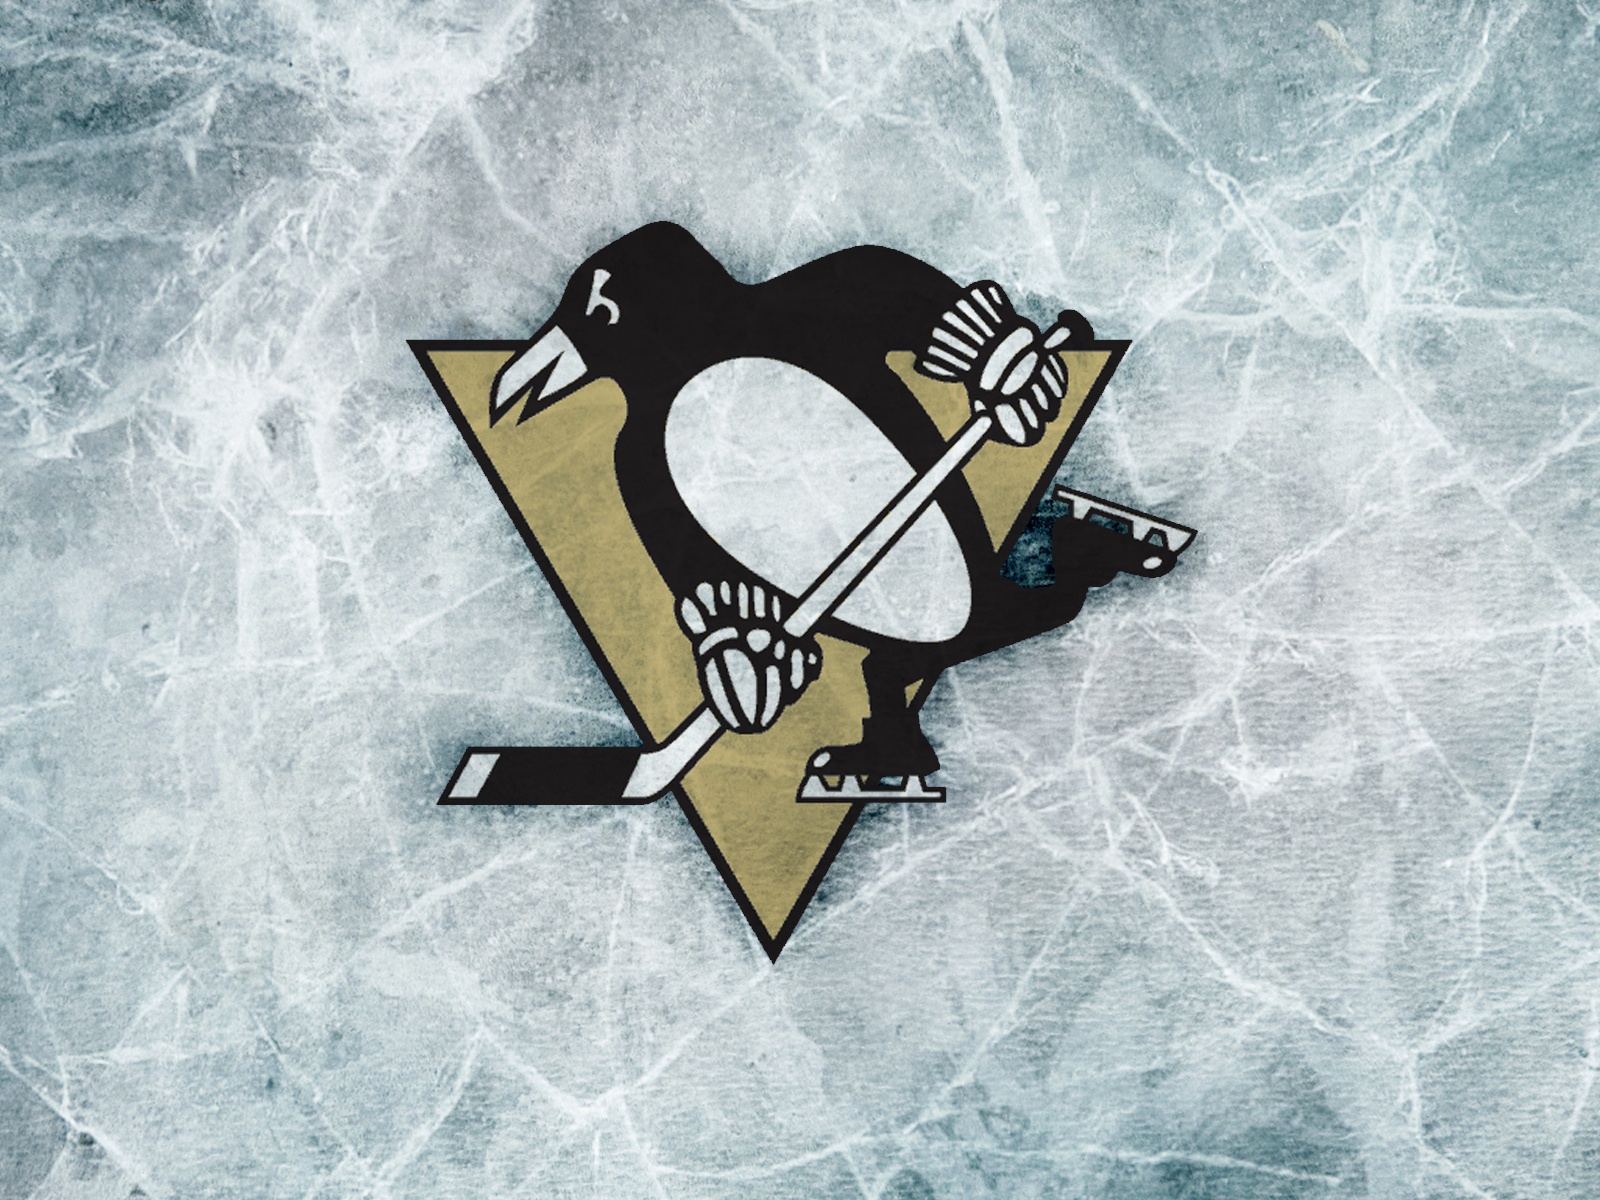 Pittsburgh Penguins Images | Pittsburgh Penguins Wallpapers ...